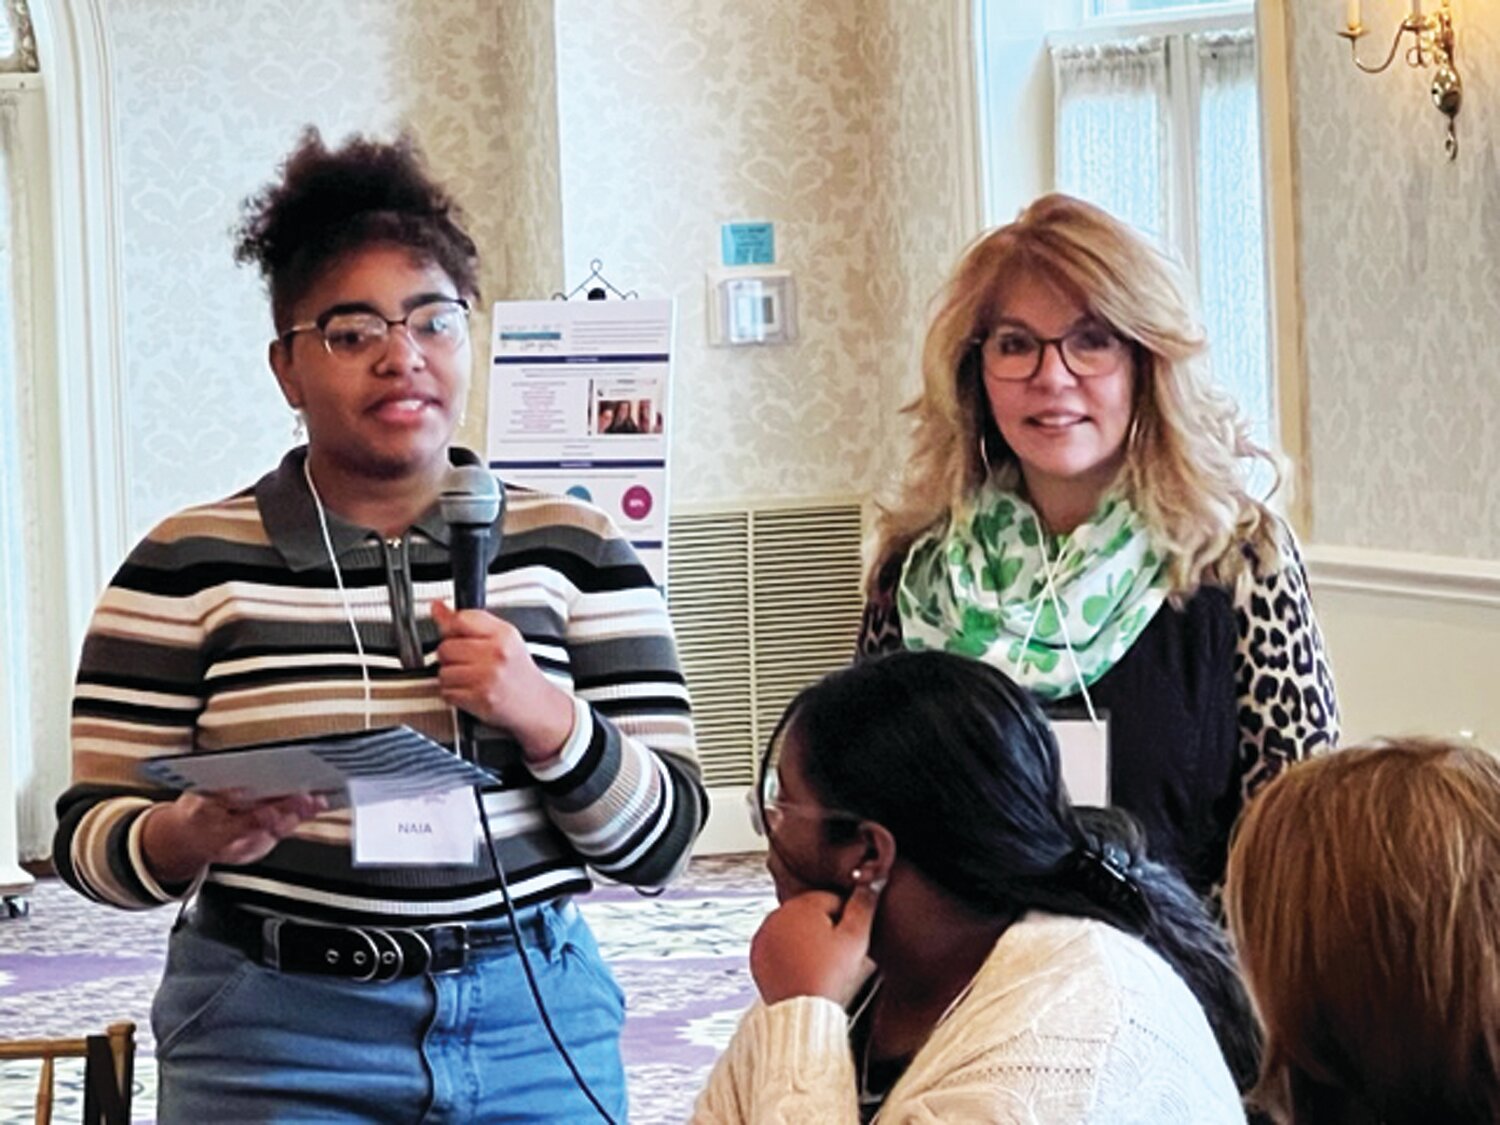 Naia James reflects on her values and interests as Hazel Smith, Soroptimist and conference facilitator, offers thoughts to help her and other participants envision a future where they are empowered to make career dreams a reality.